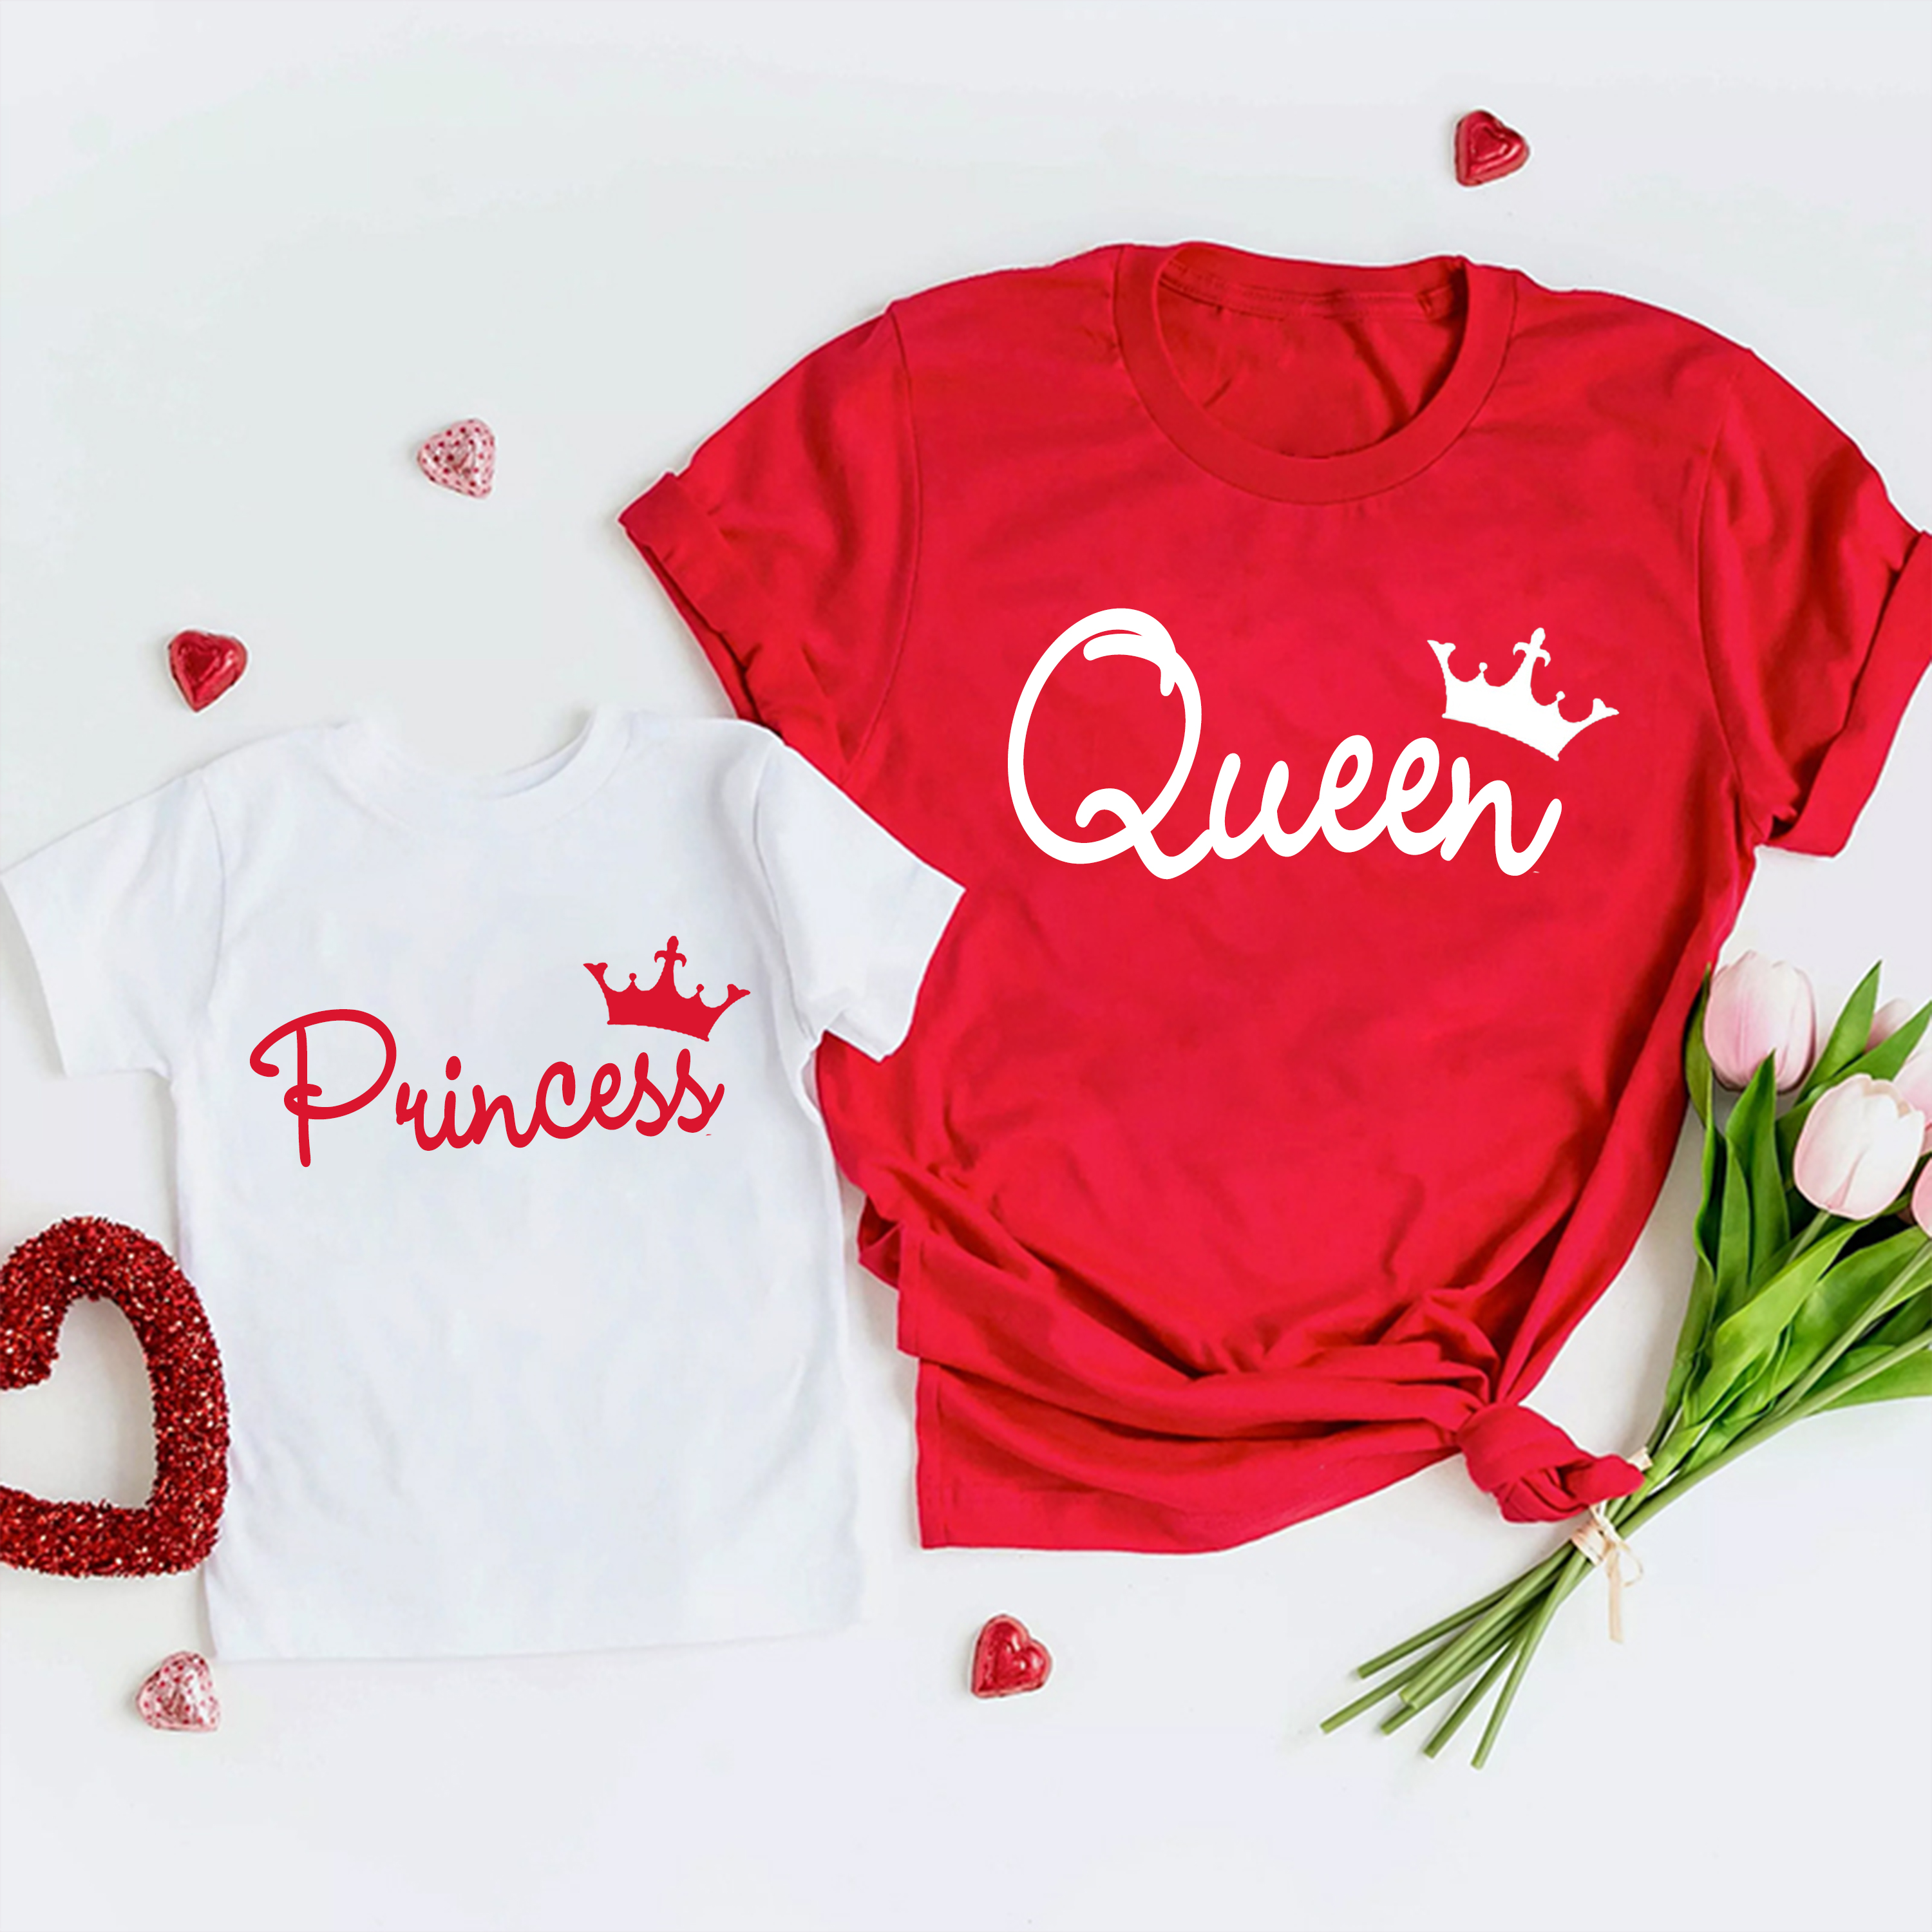 Kings And Queens Family Matching Shirts